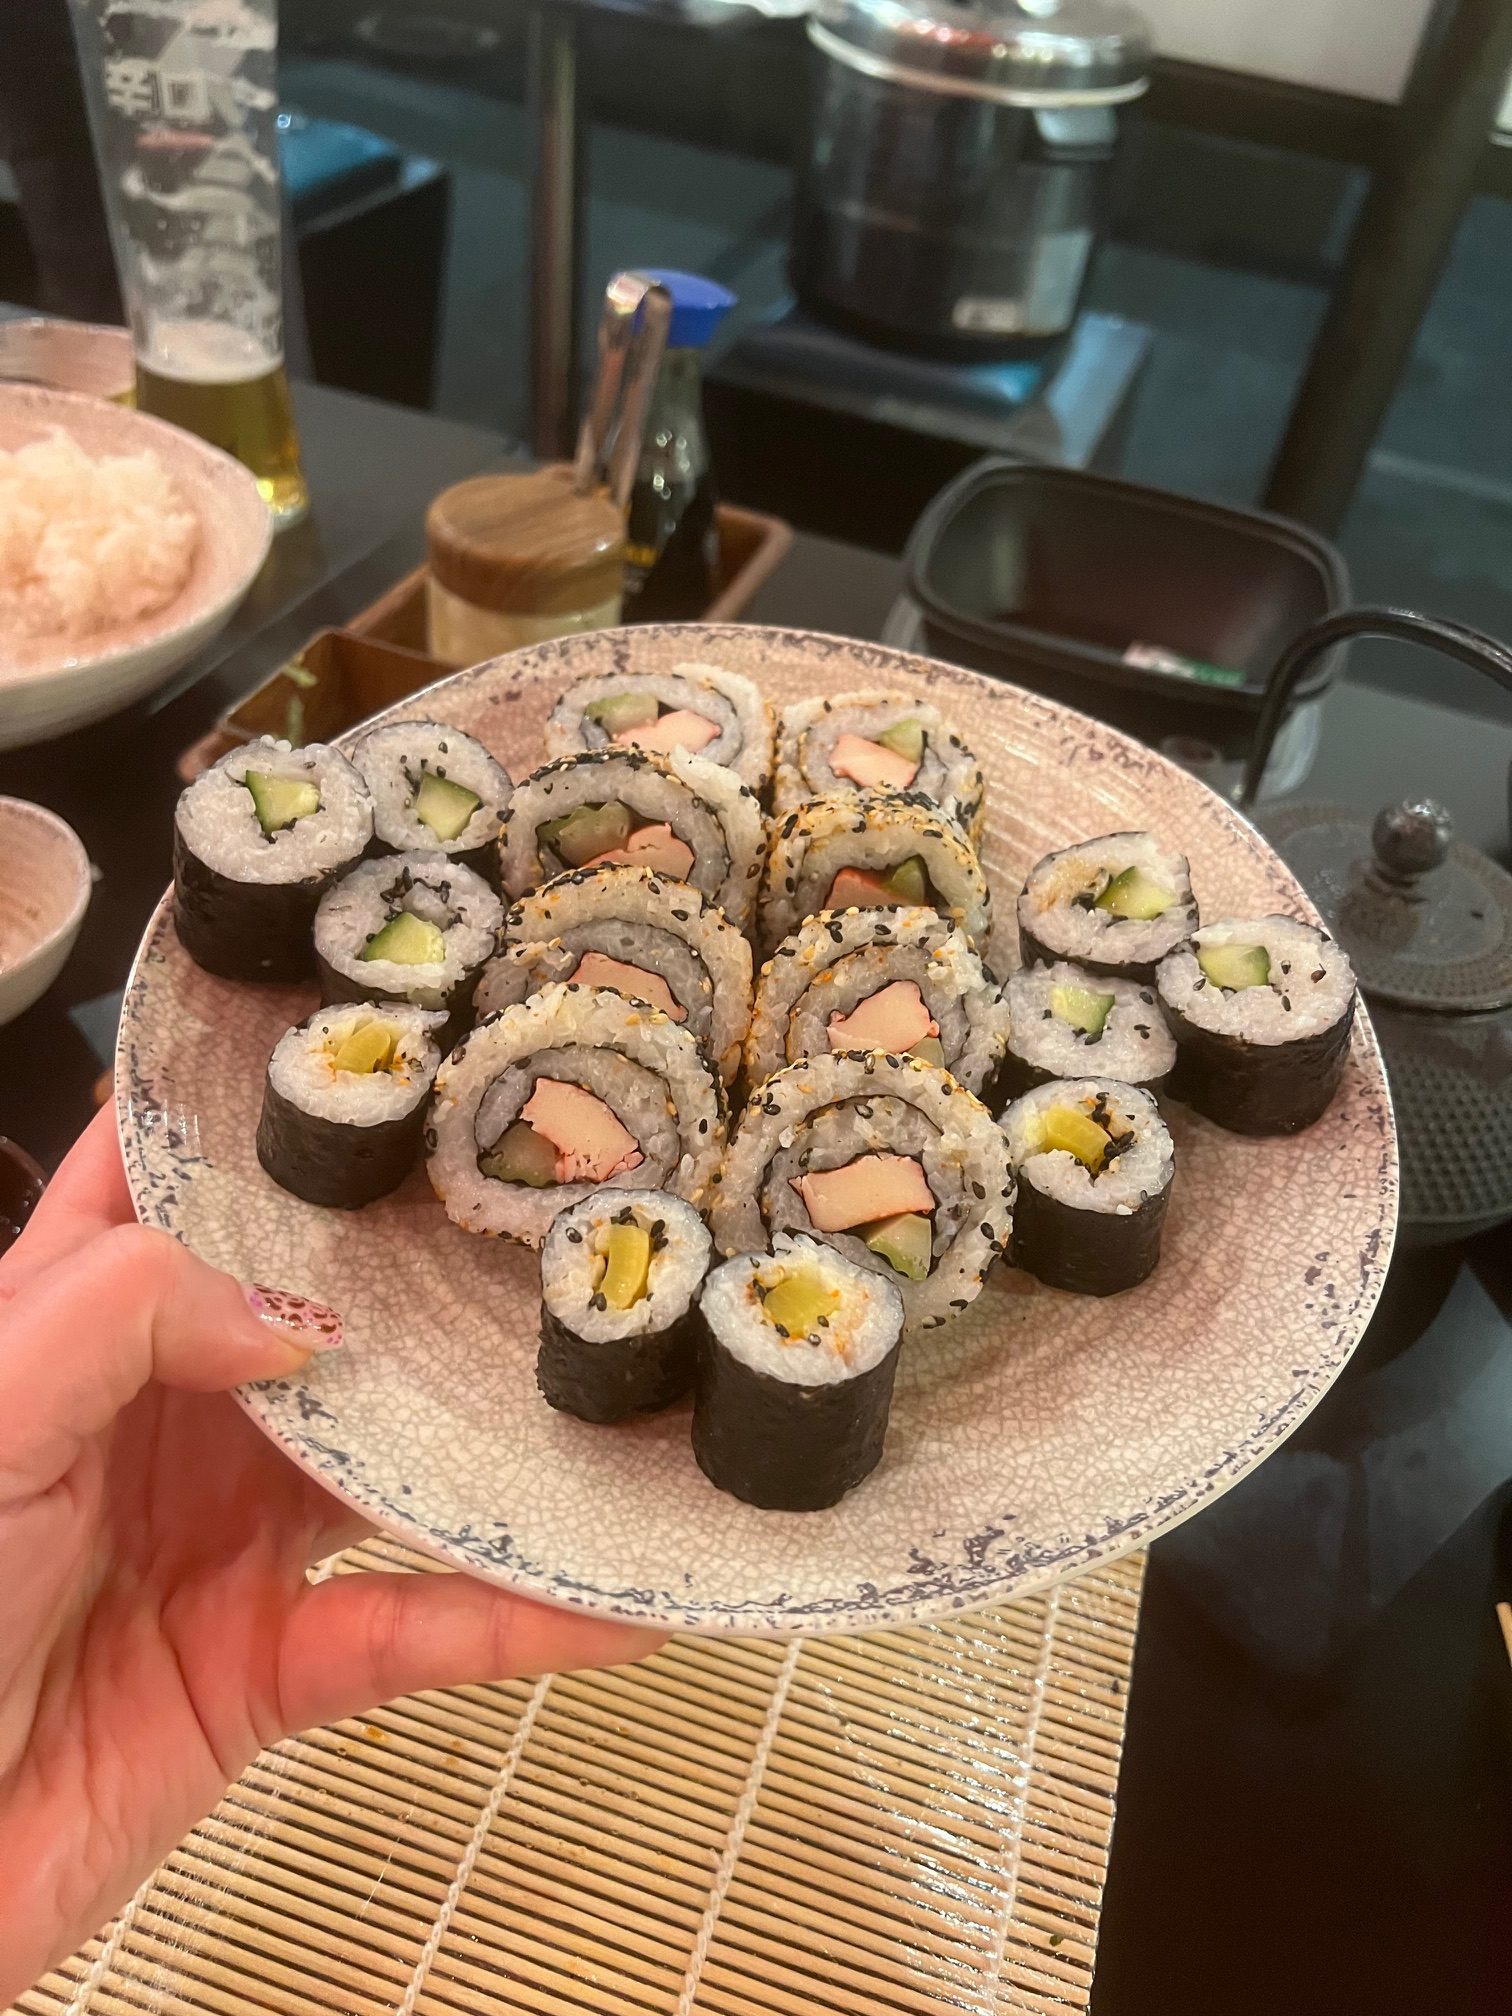 White hand holds a plate of sushi roll portions - maki and California rolls; table is visible beneath the plate, photo is taken indoors